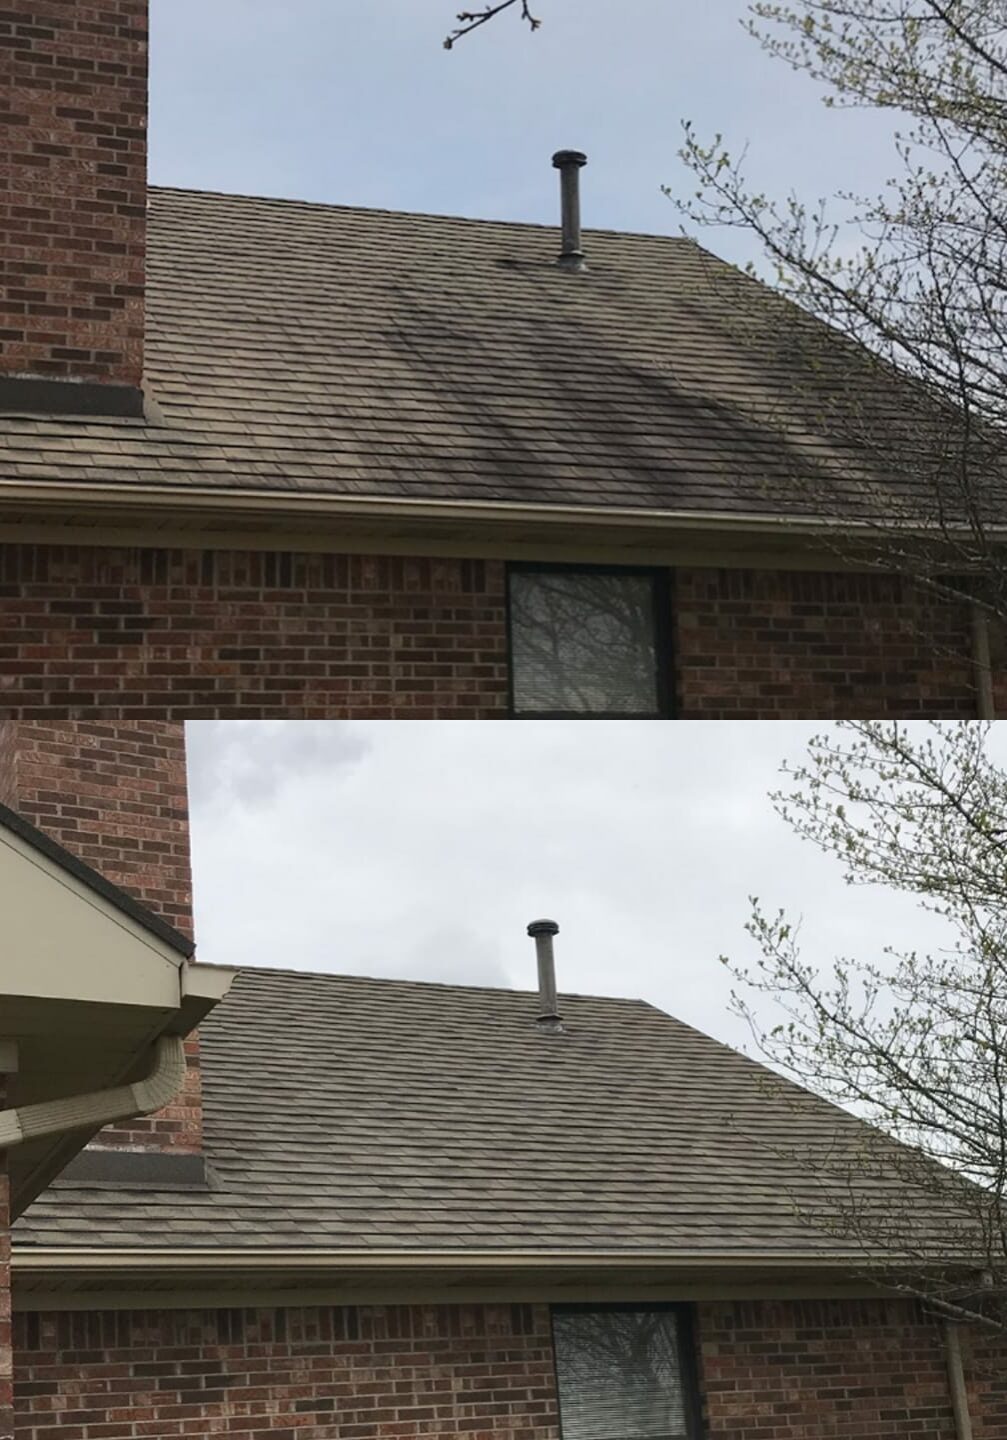 Grime Stoppers restores the beautiful appearance of home roofs in and around Owensboro, KY, with our roof cleaning services